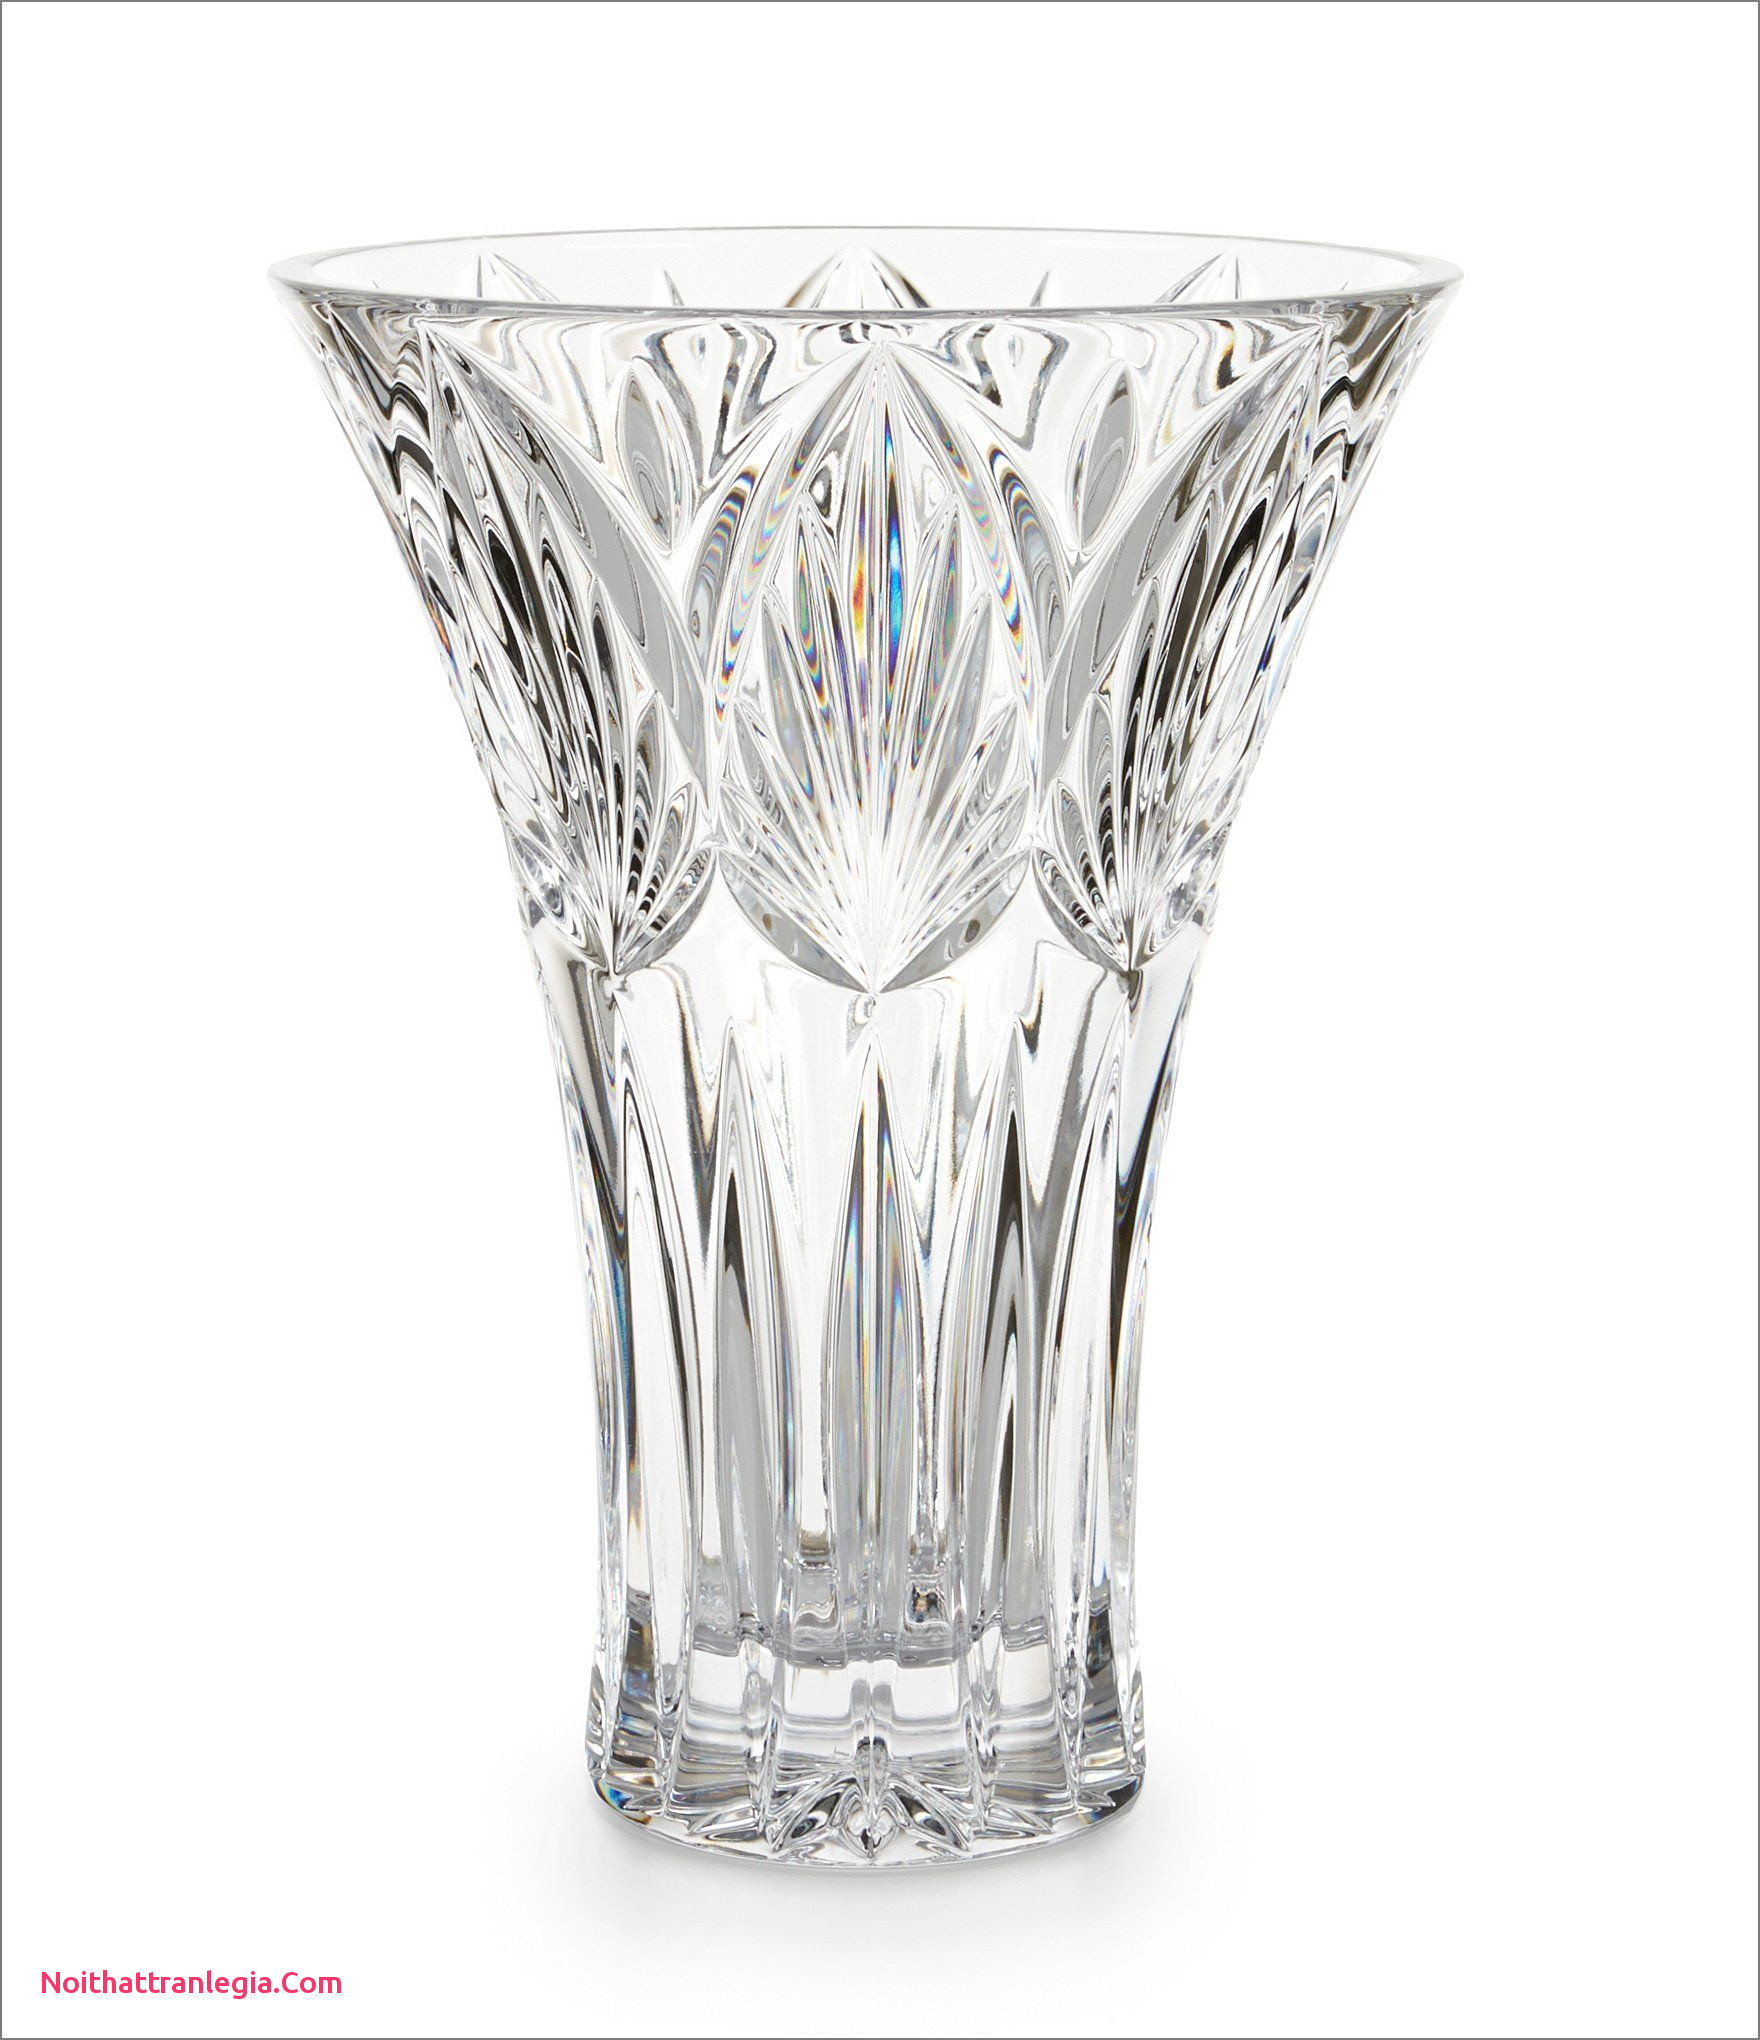 27 Great 20 Inch Glass Vase 2024 free download 20 inch glass vase of 20 large waterford crystal vase noithattranlegia vases design with large waterford crystal vase best of waterford westbridge crystal vase of large waterford crystal vas